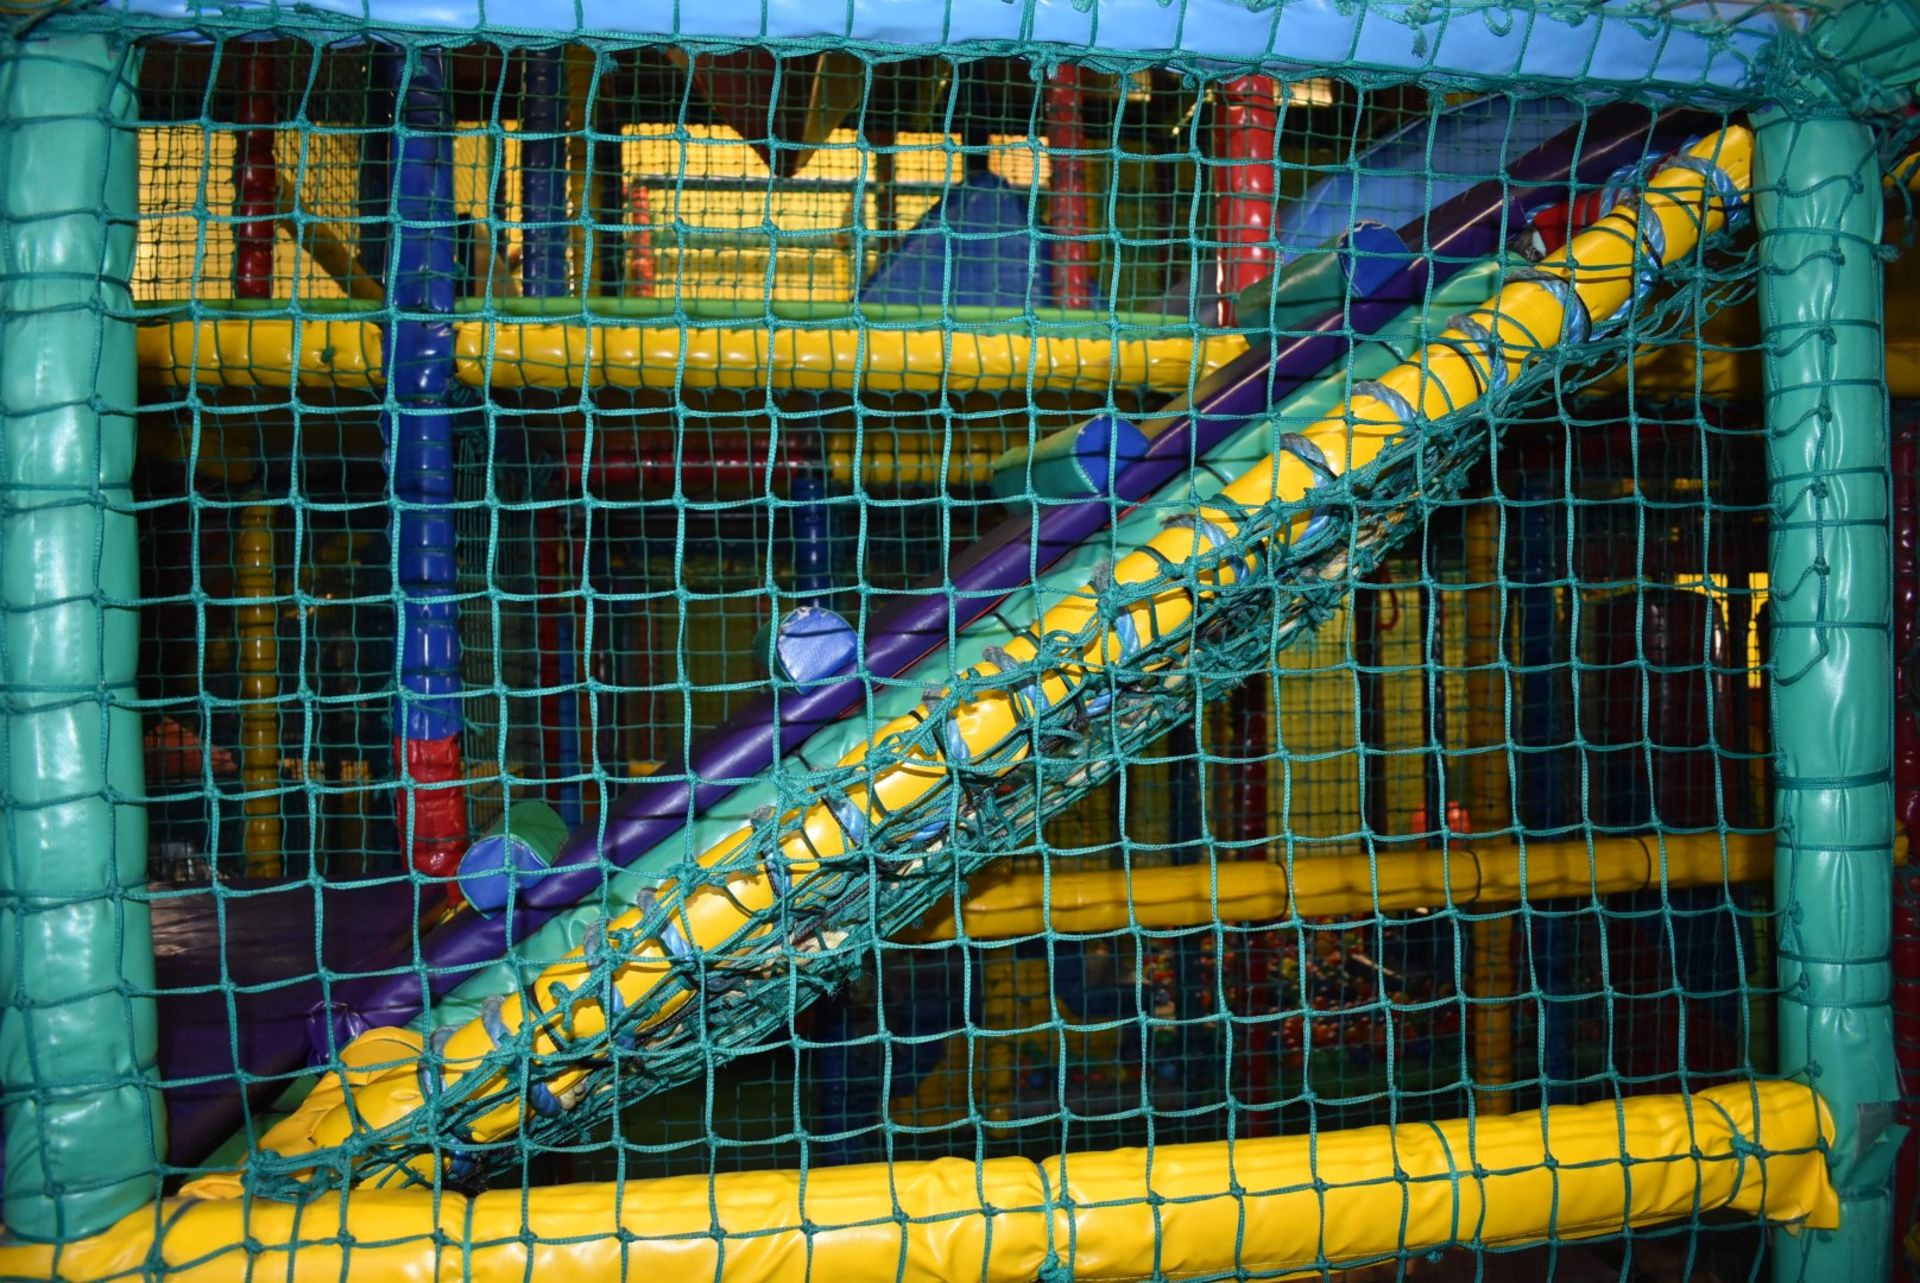 Bramleys Big Adventure Playground - Giant Action-Packed Playcentre With Slides, Zip Line Swings, - Image 39 of 128